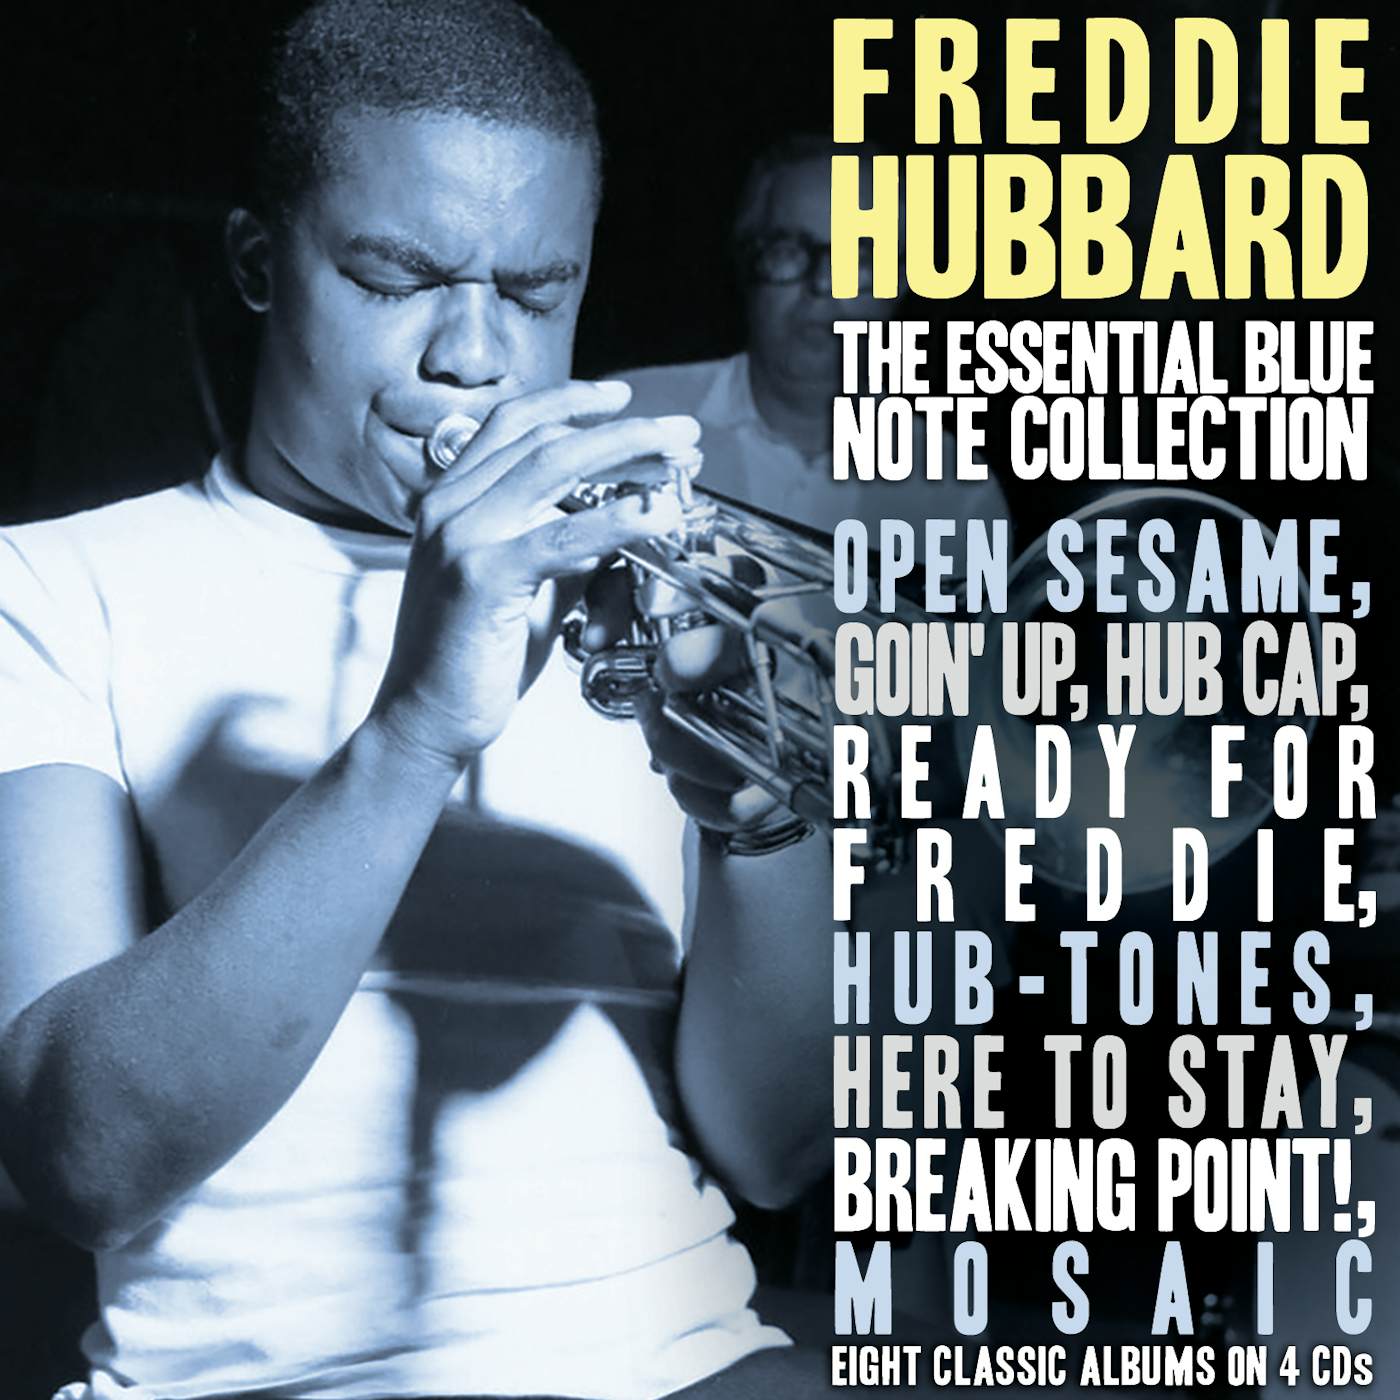 Freddie Hubbard ESSENTIAL BLUE NOTE COLLECTION CD